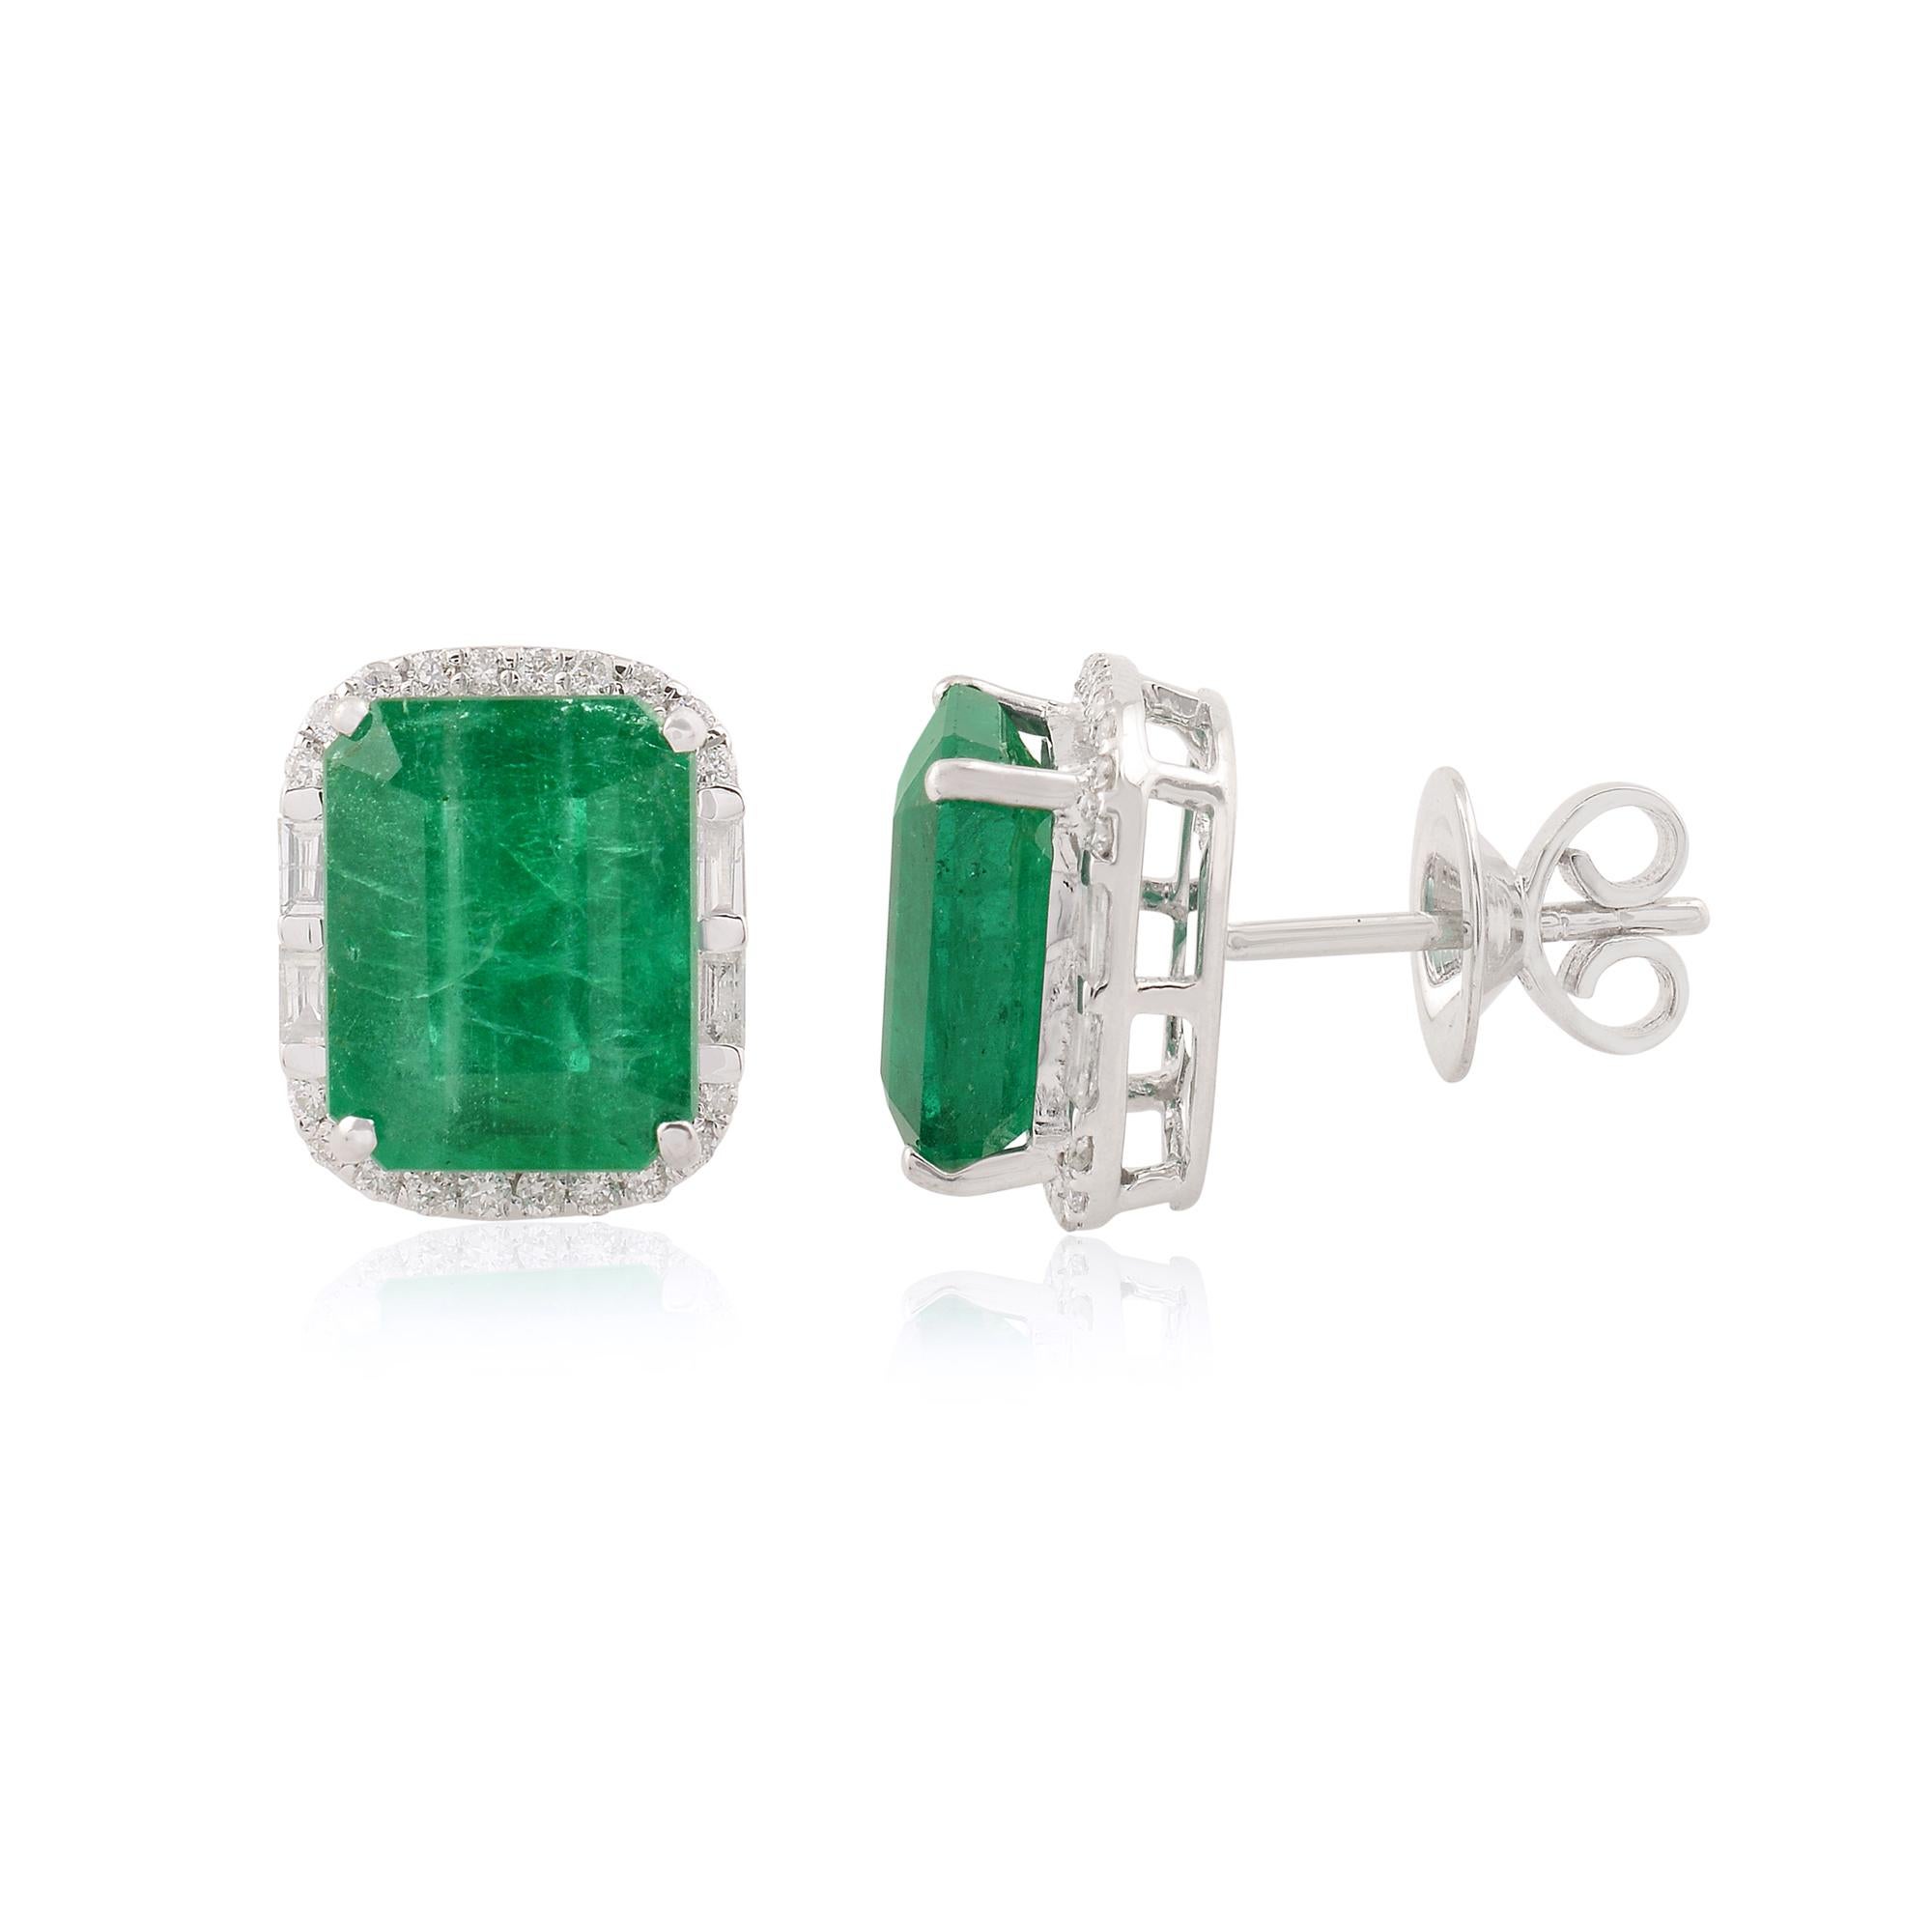 Item Code:- SEE-1076 (14k)
Gross Wt :- 4.22 gm
14k Solid White Gold Wt :- 3.02 gm
Natural Diamond Wt :- 0.4 ct. ( AVERAGE DIAMOND CLARITY SI1-SI2 & COLOR H-I )
Emerald Wt :- 5.62 ct.
Earrings Size :- 12x10 mm Approx

✦